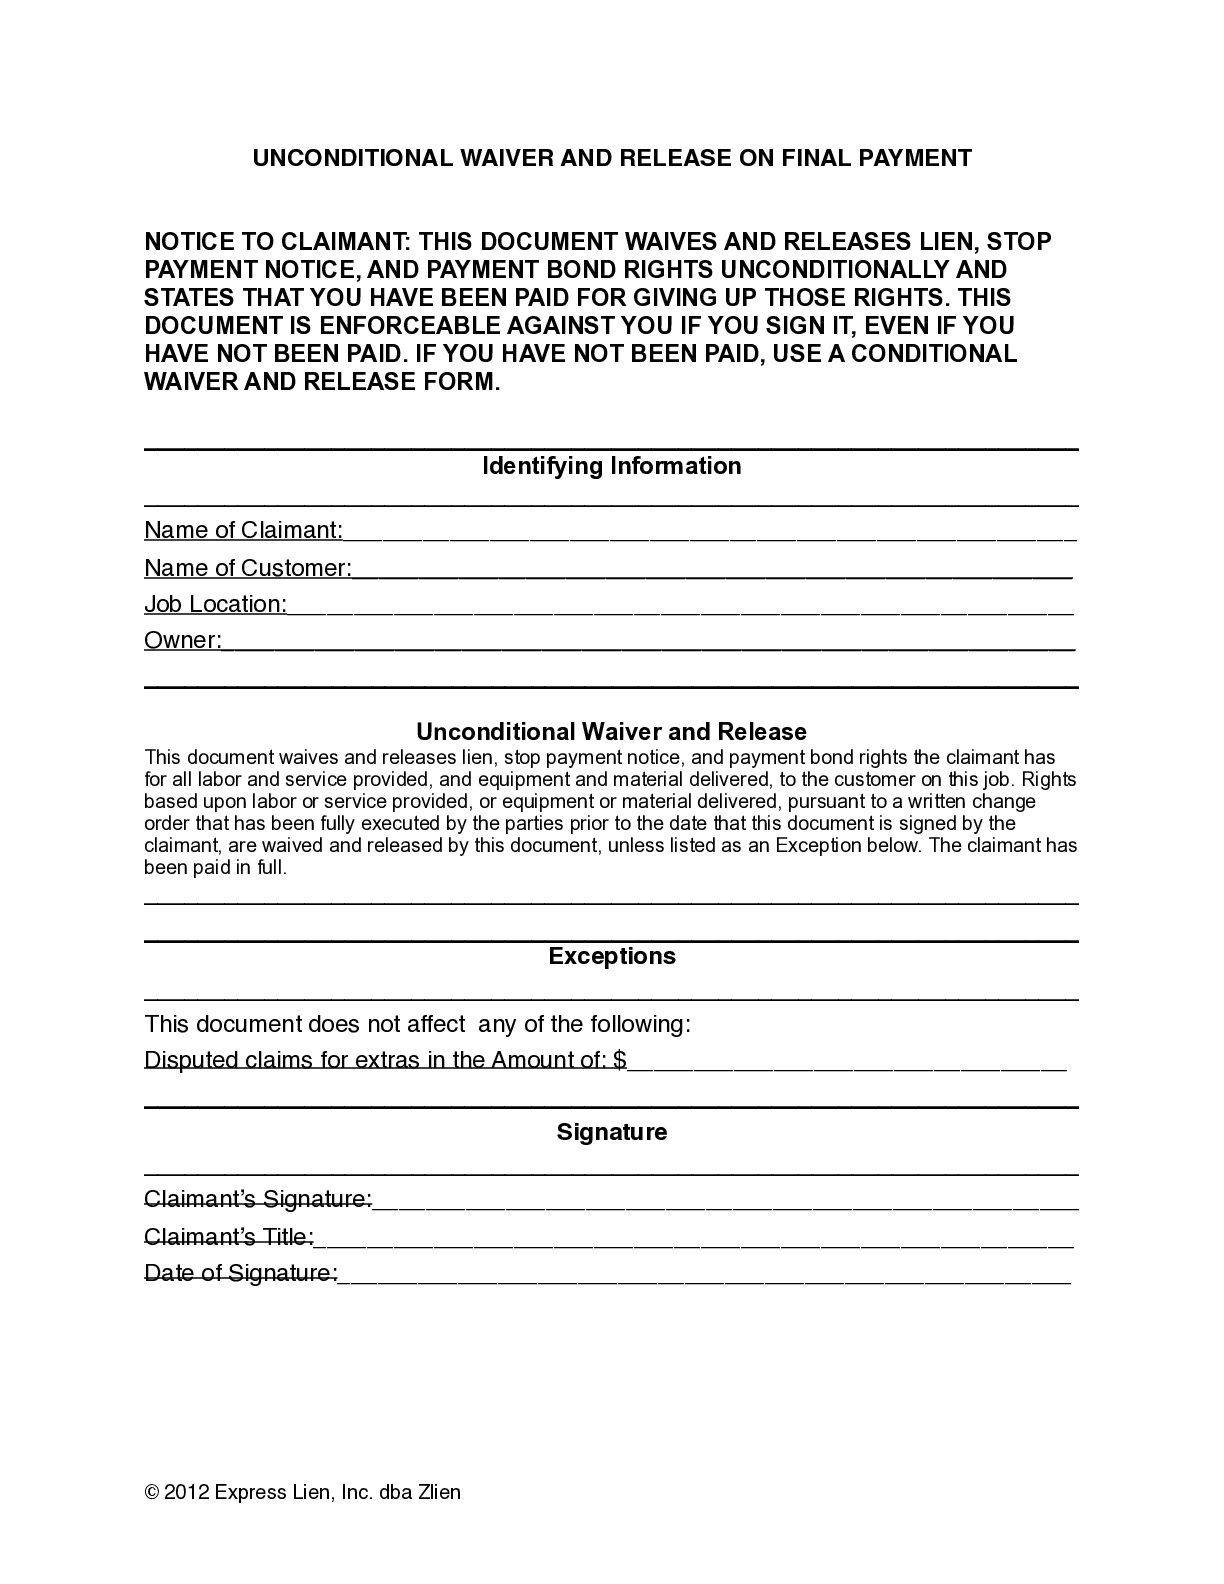 New York Final Unconditional Lien Waiver Form - free from